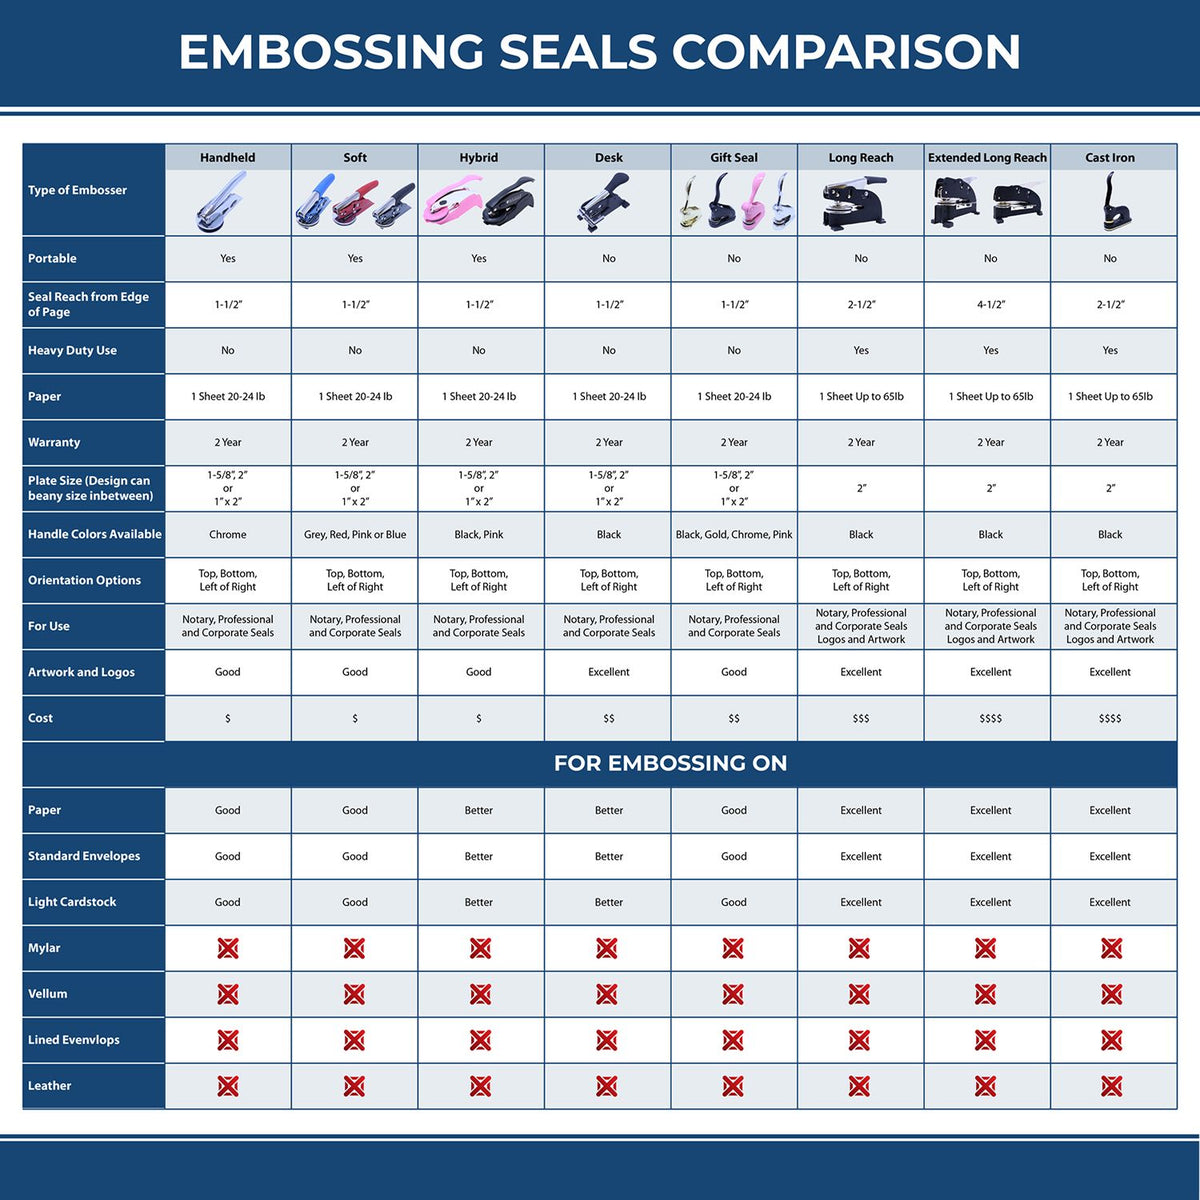 A comparison chart for the different types of mount models available for the Handheld North Dakota Architect Seal Embosser.